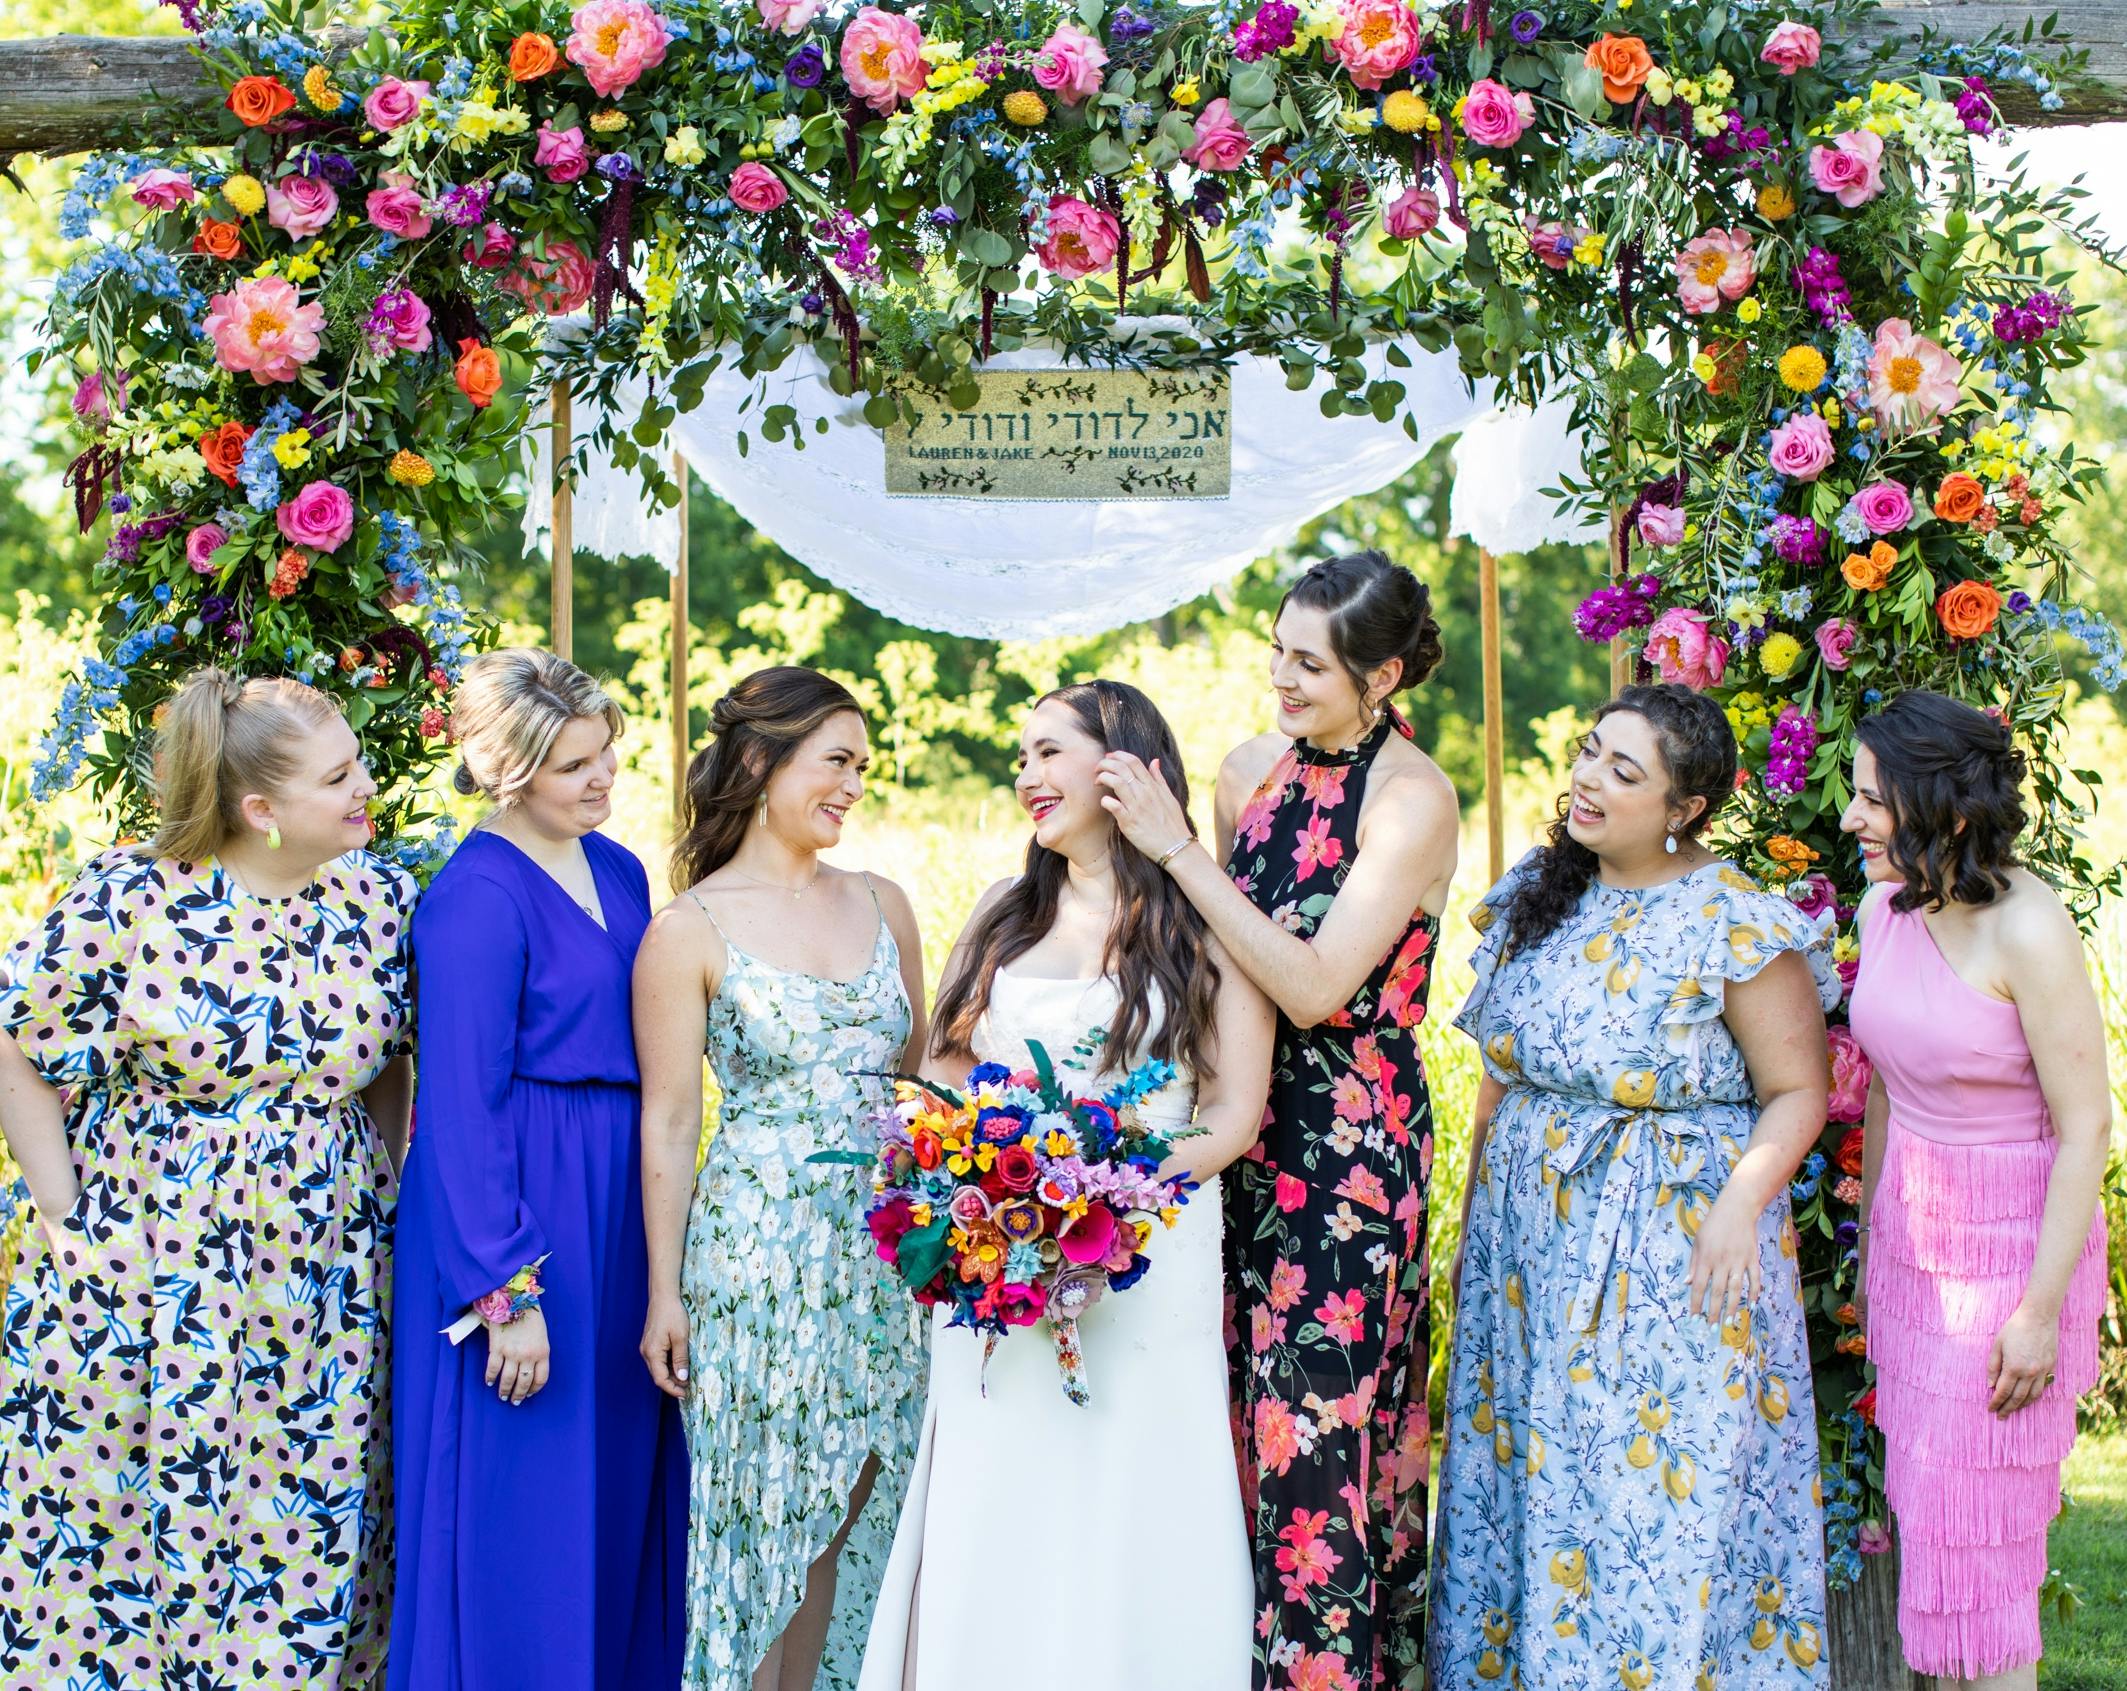 Lauren with her bouquet and her unofficial bridesmaids in front of the chuppah.